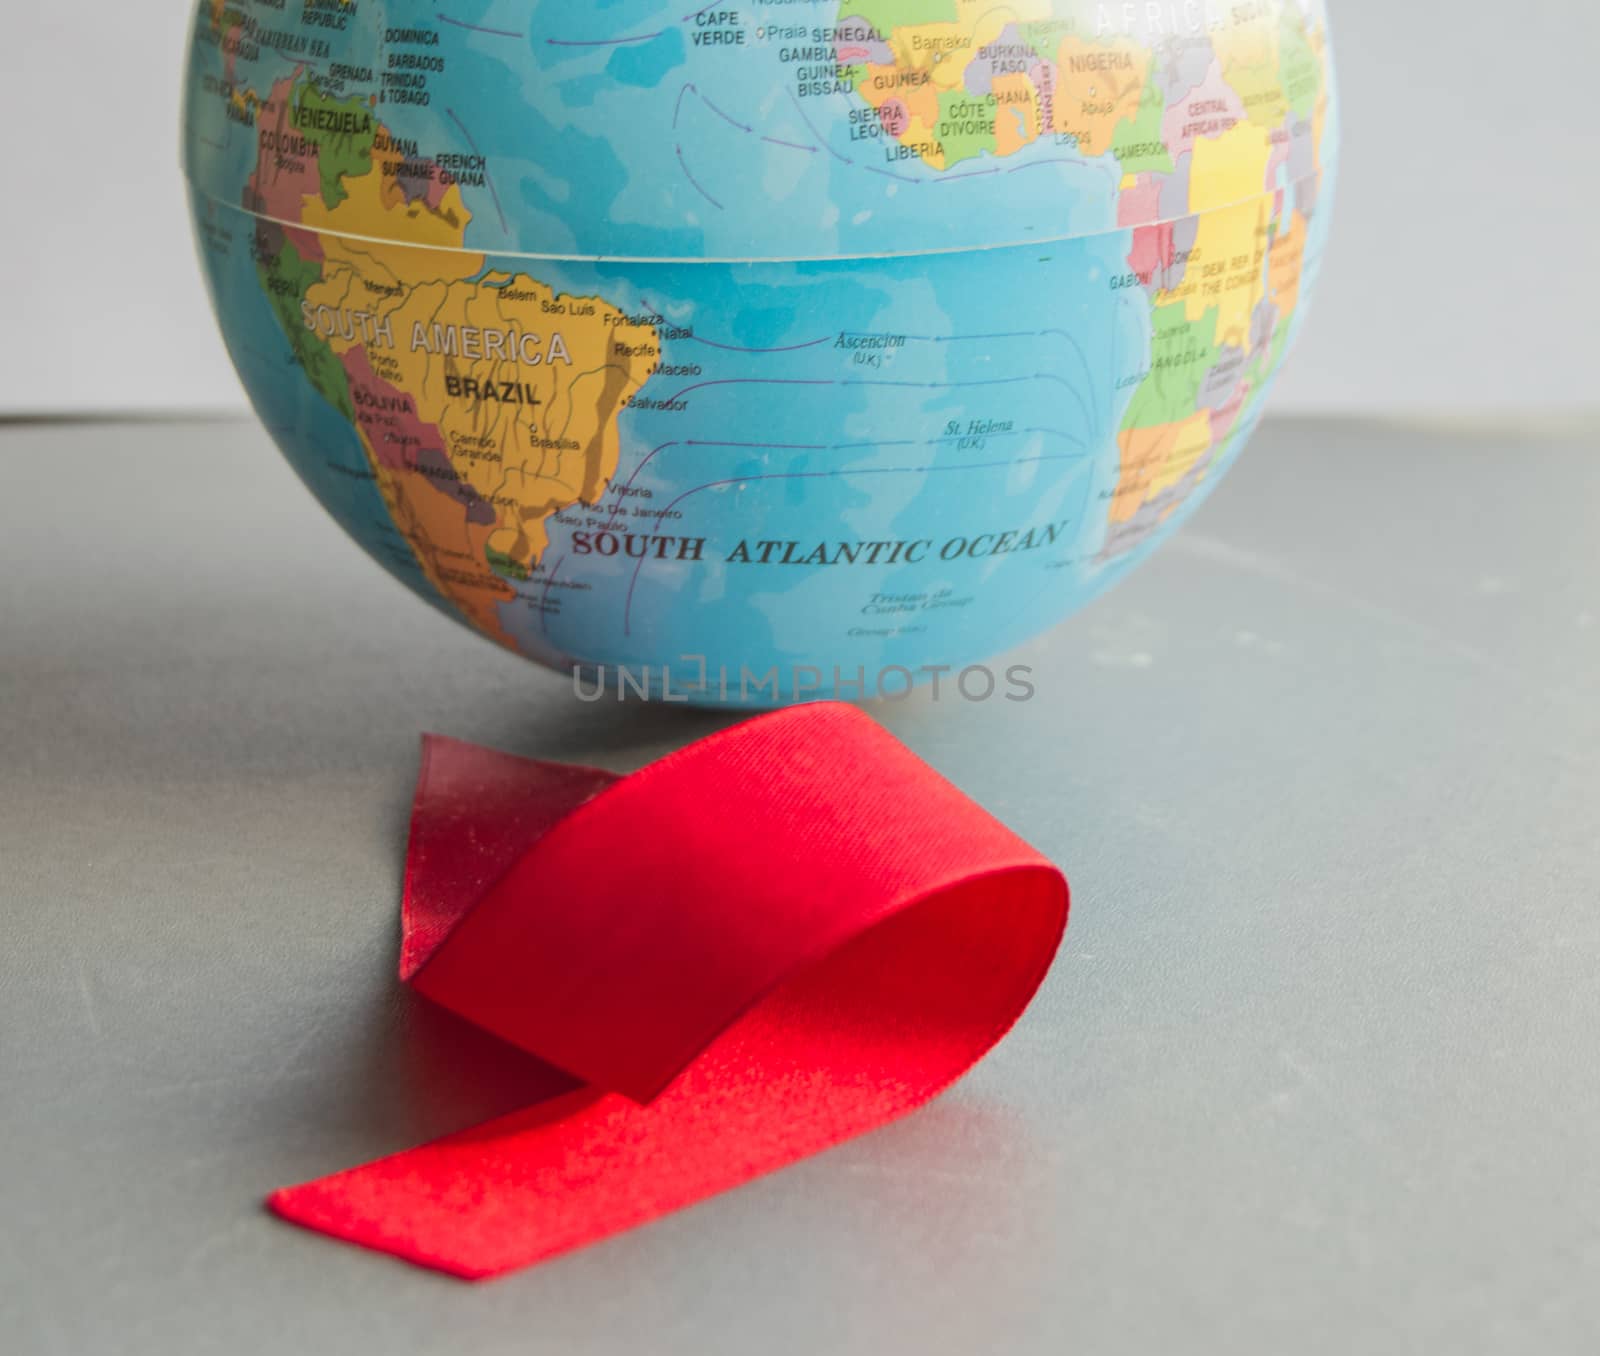 World AIDS day 1 December, close-up of world globe with red ribbon.